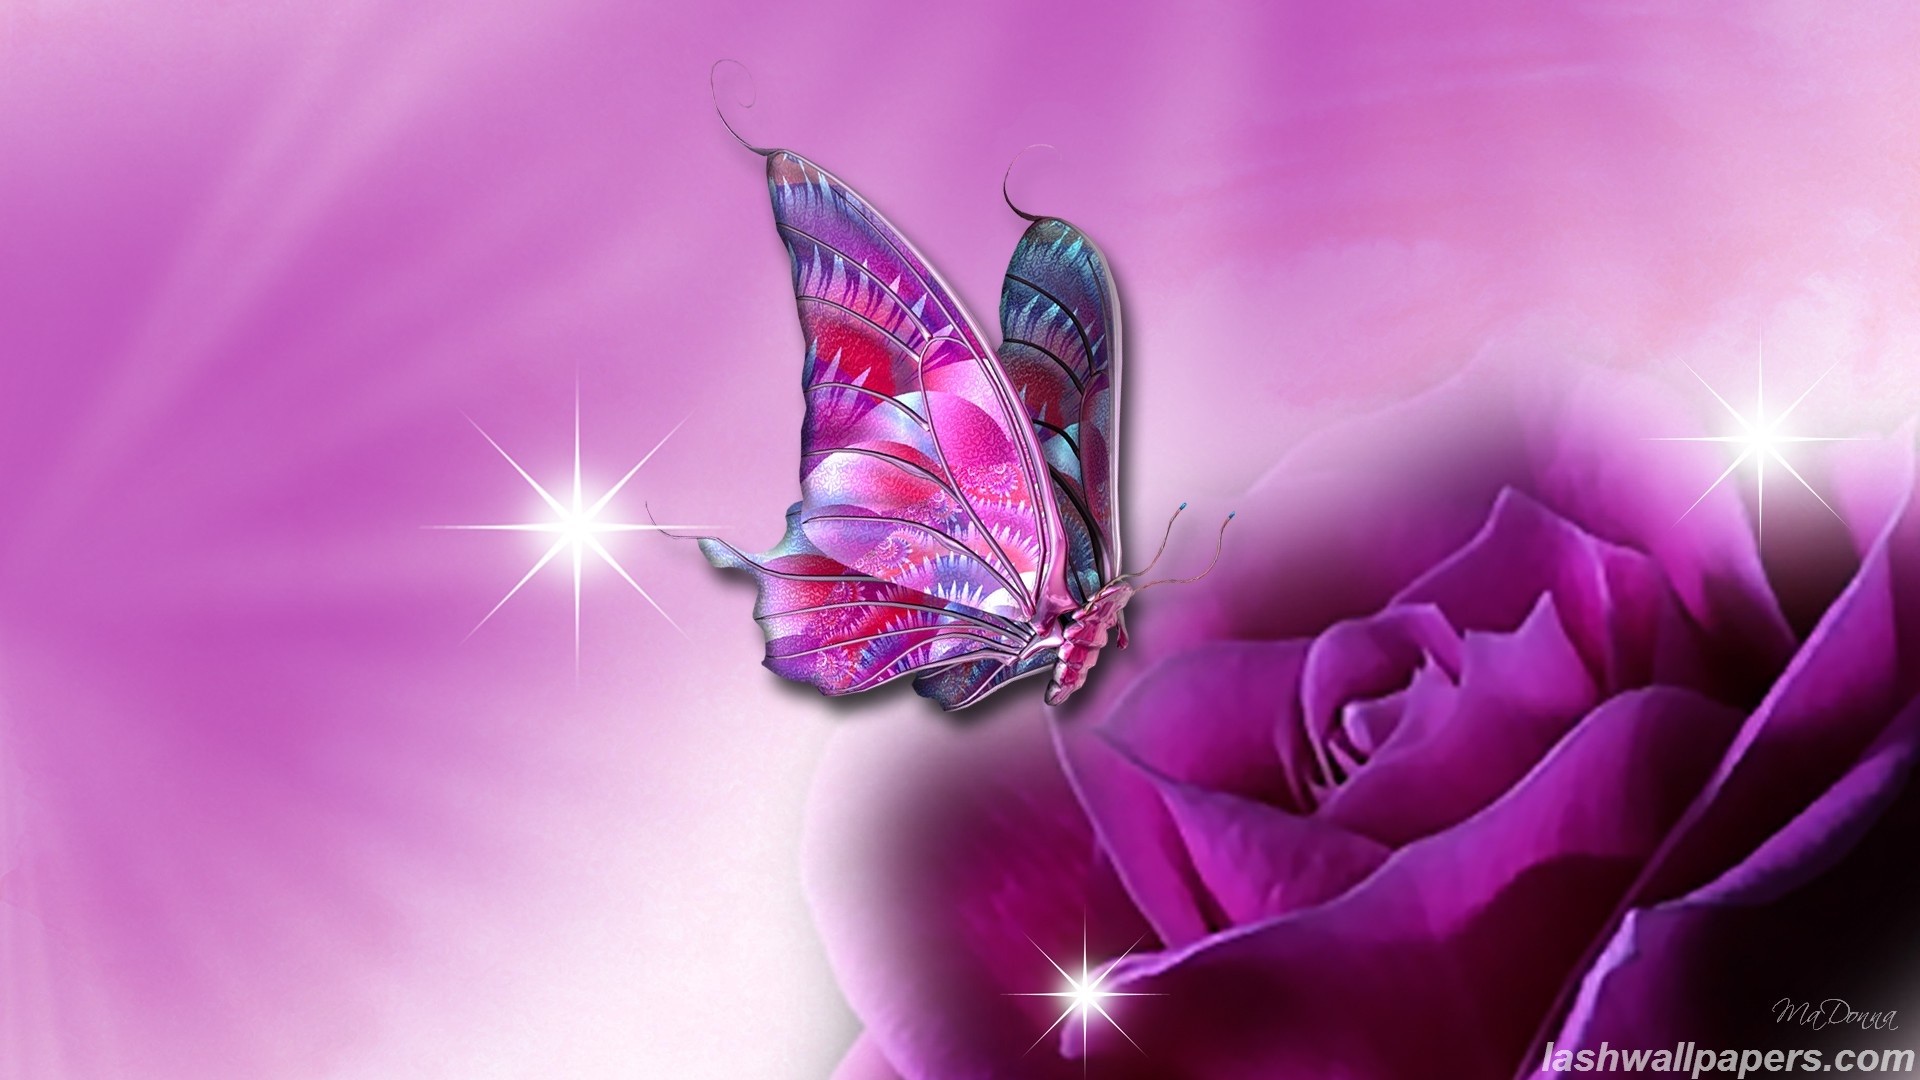 1920x1080 Butterfly Wallpaper For Mobile Phone Hd | Wallpaper Kid Galleries .